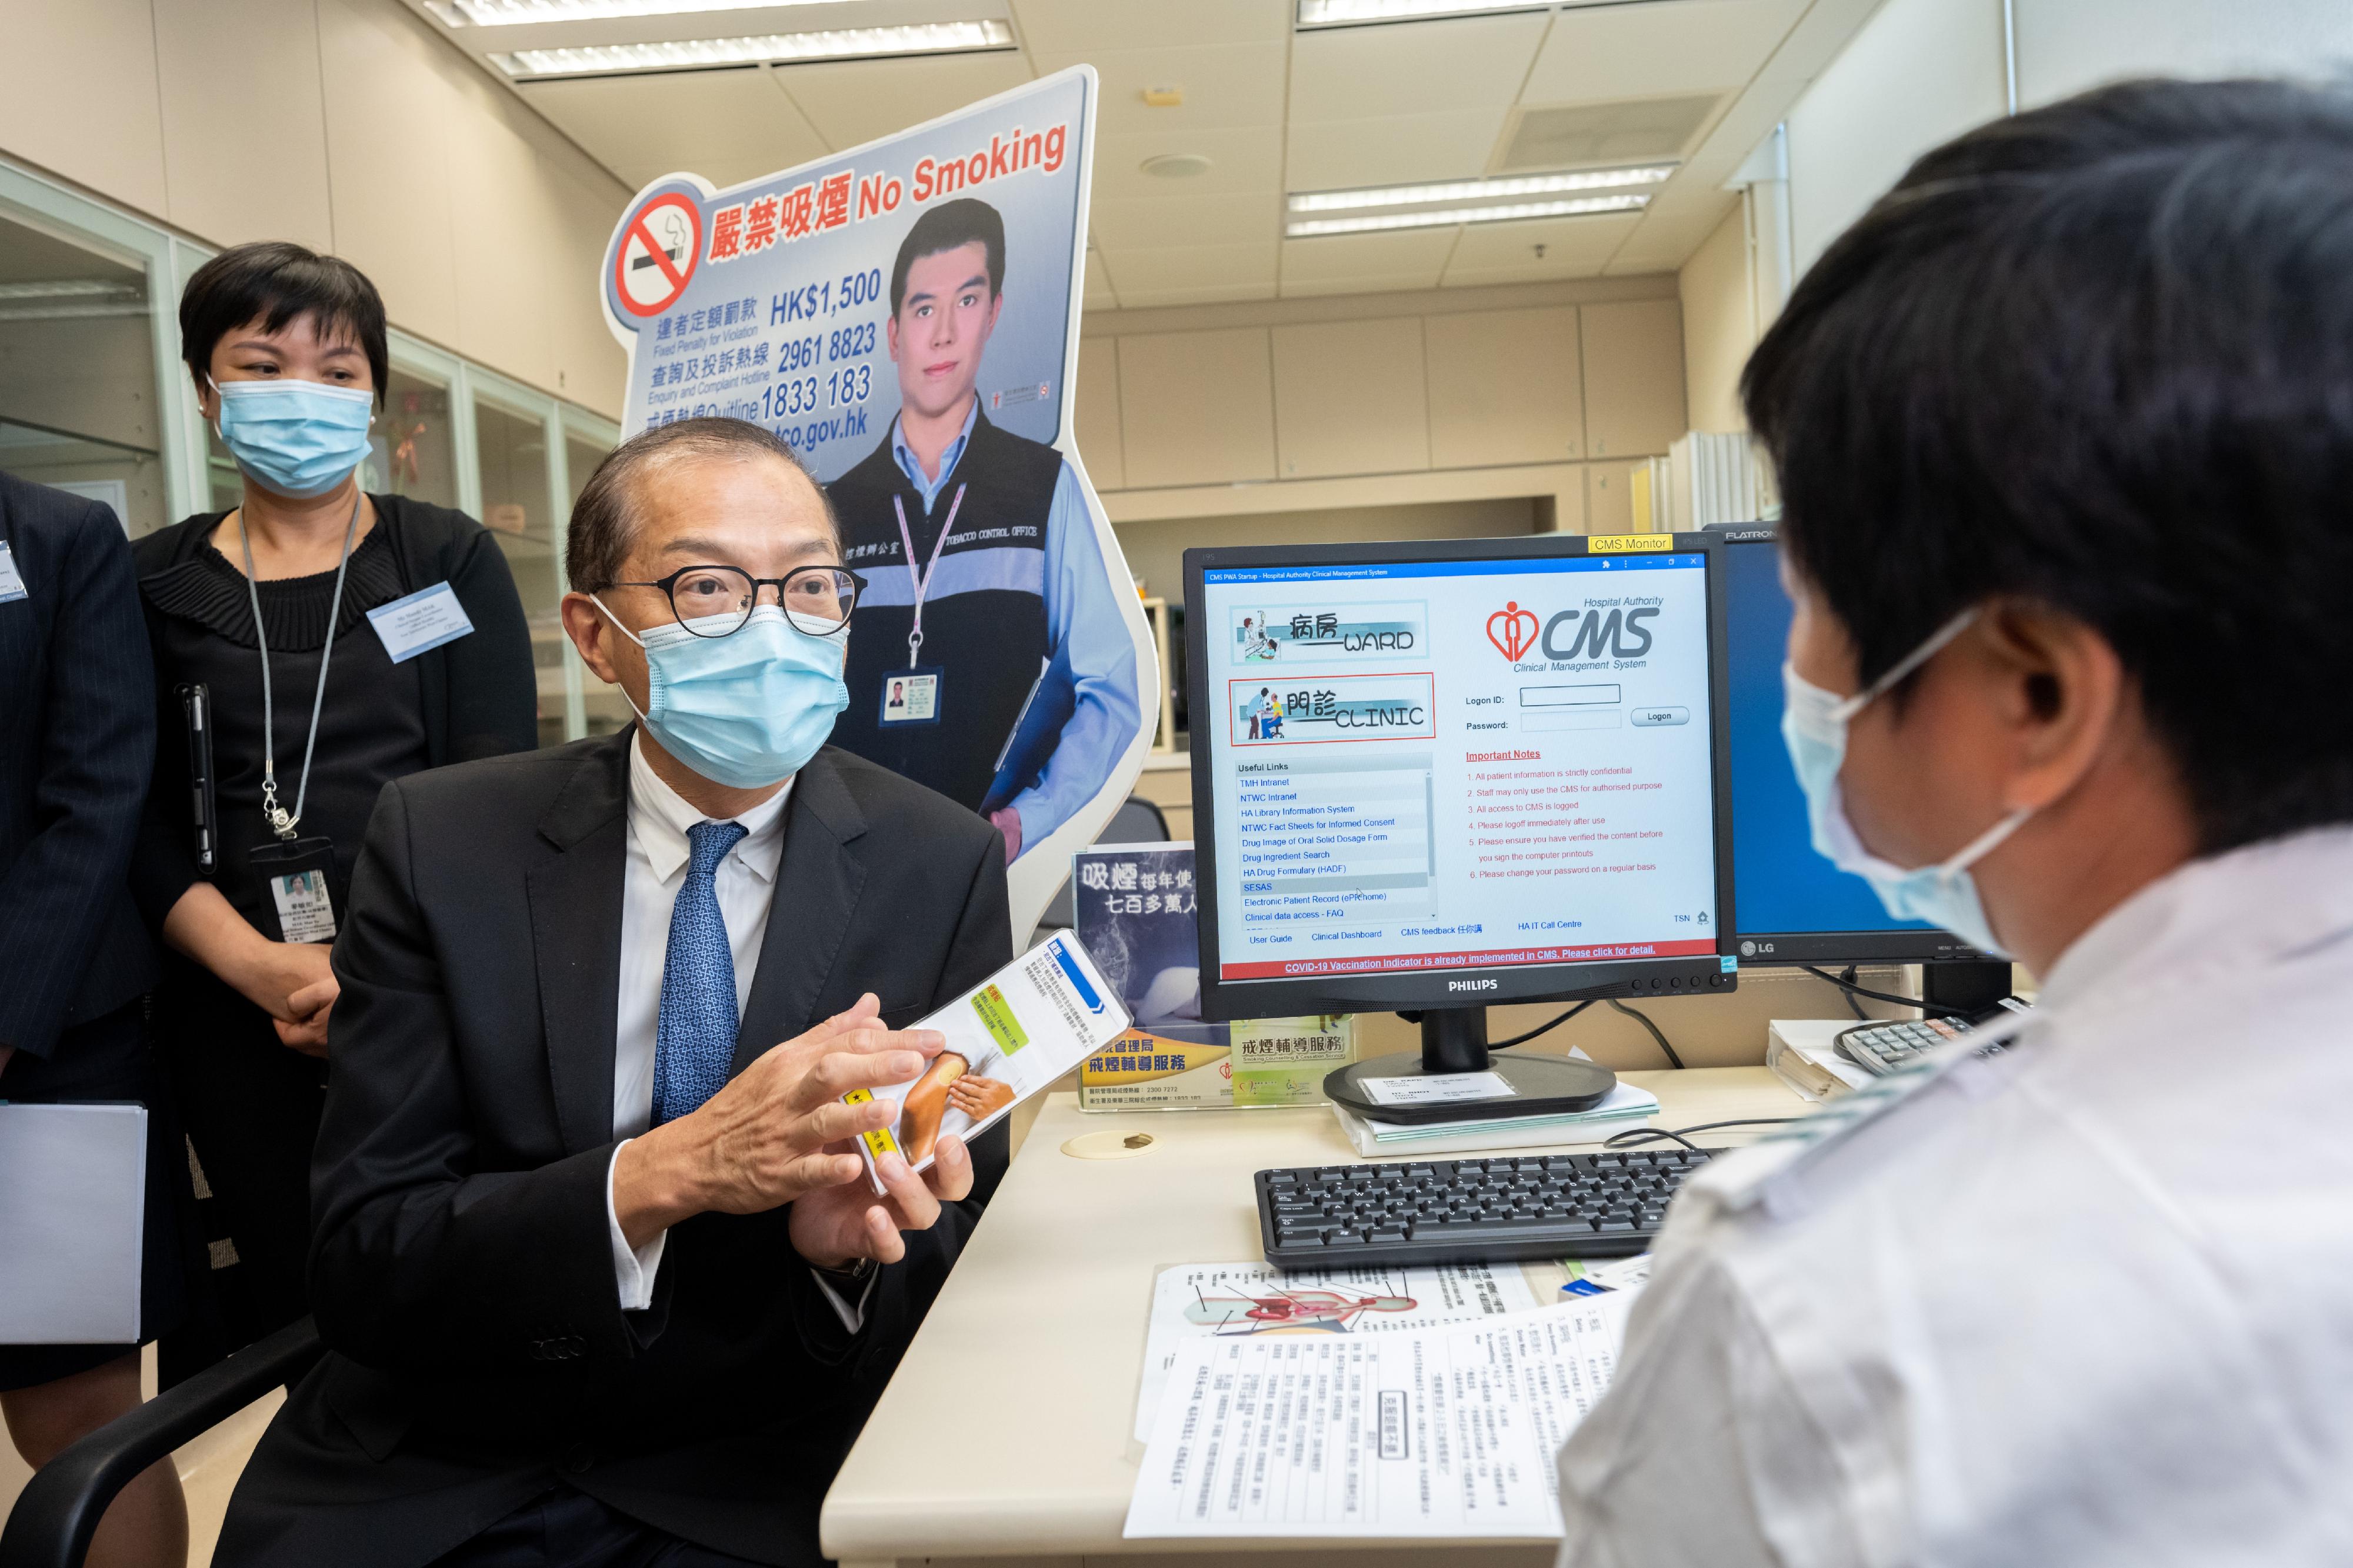 The Secretary for Health, Professor Lo Chung-mau (second left), visits the Tin Shui Wai (Tin Yip Road) Community Health Centre today (July 20) and receives a briefing by a staff member on the smoking cessation service provided by the Centre.